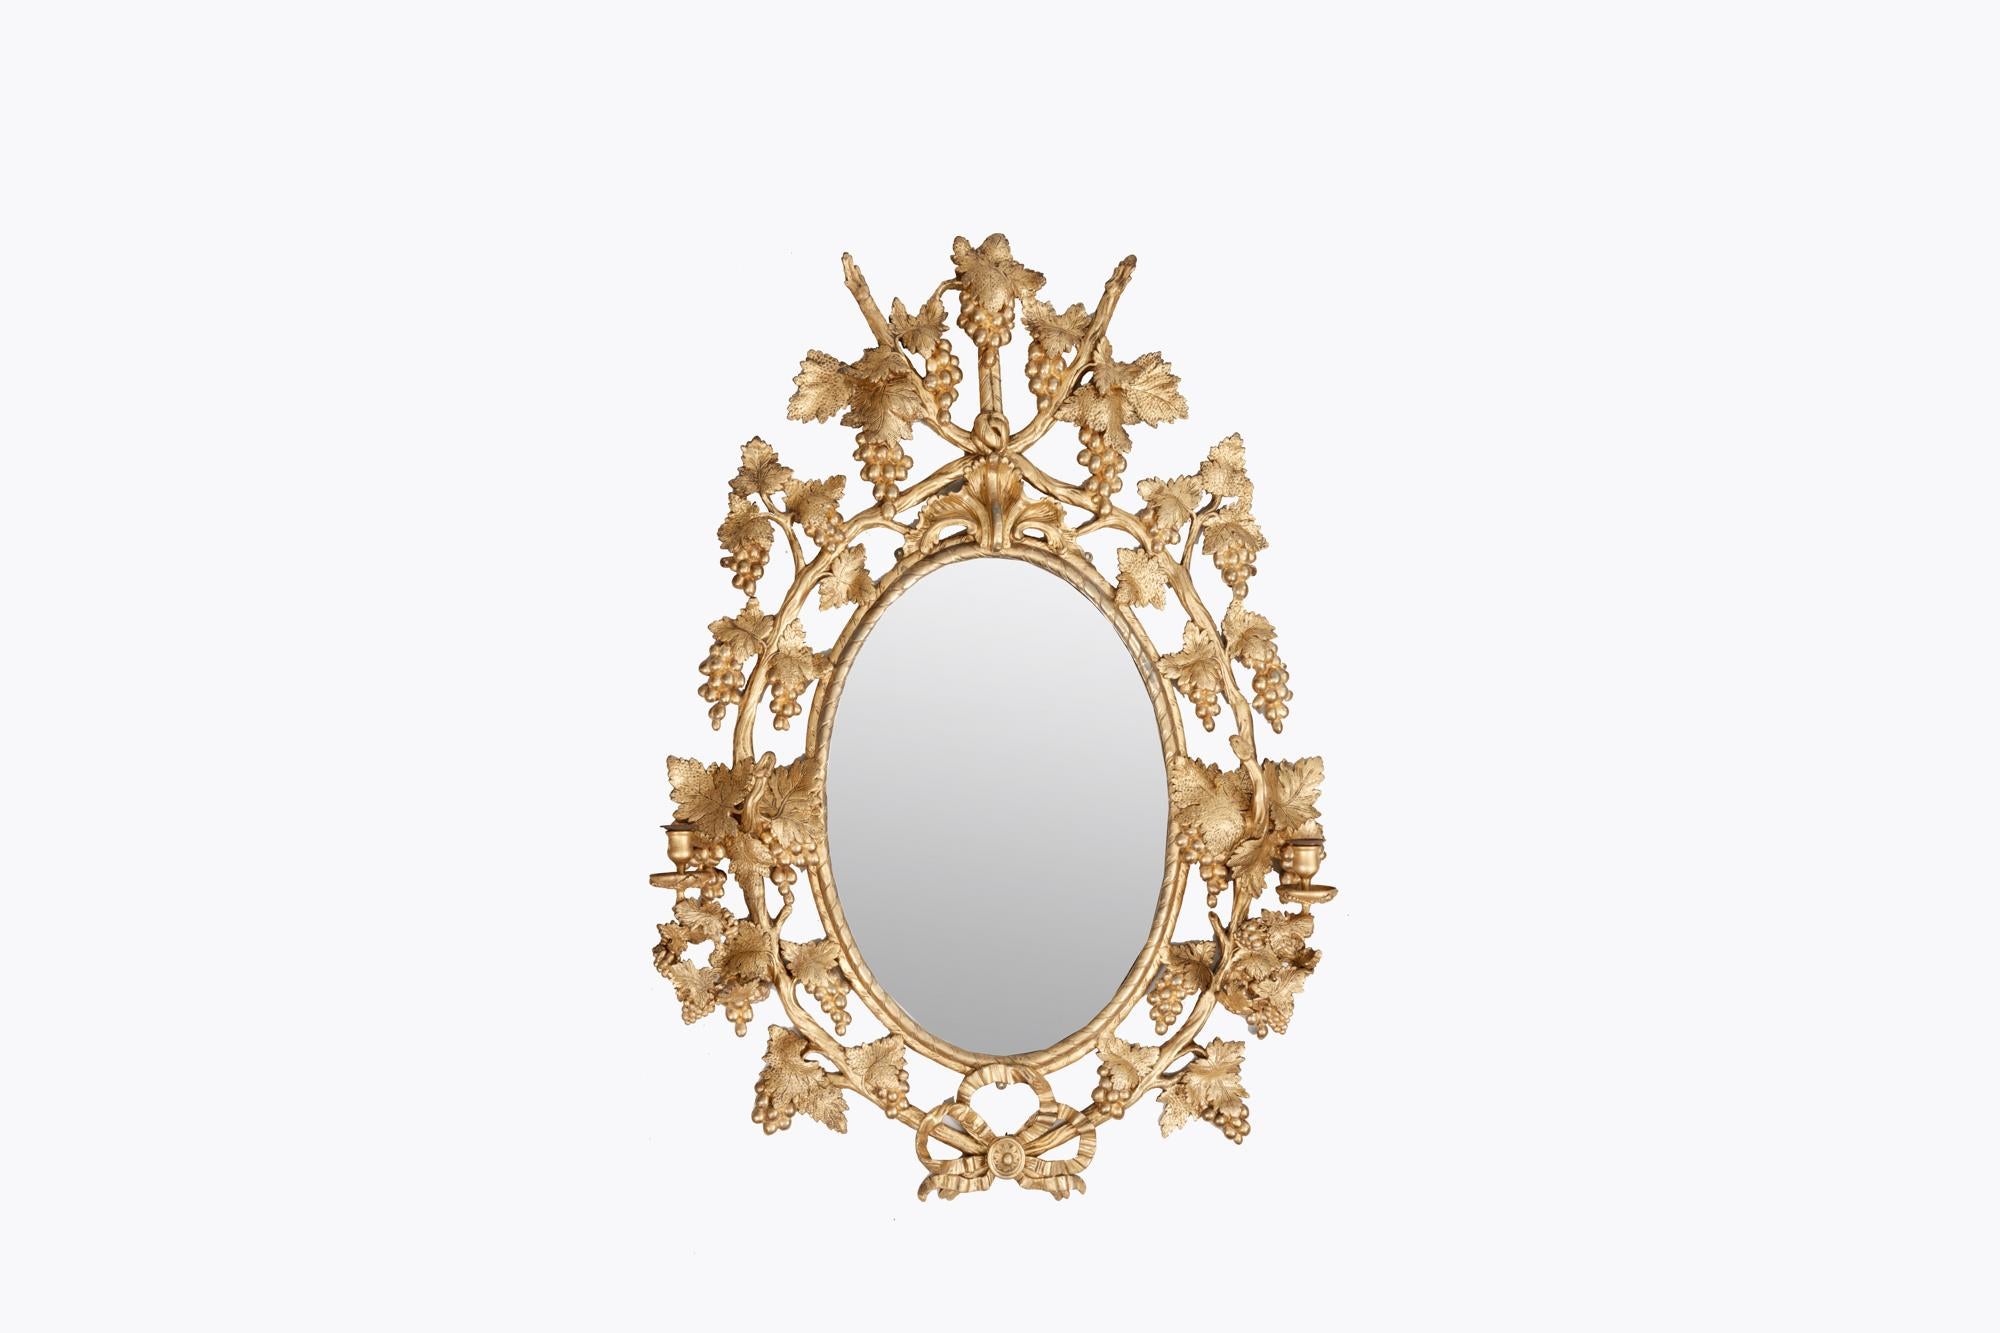 Mid 18th Century Irish carved giltwood oval girandole mirror attributed to John Booker. Boasting a highly ornate carved giltwood border surrounded by vine stock with leaves and bunches of grapes, all connected by a rope tied in a knot to the base.